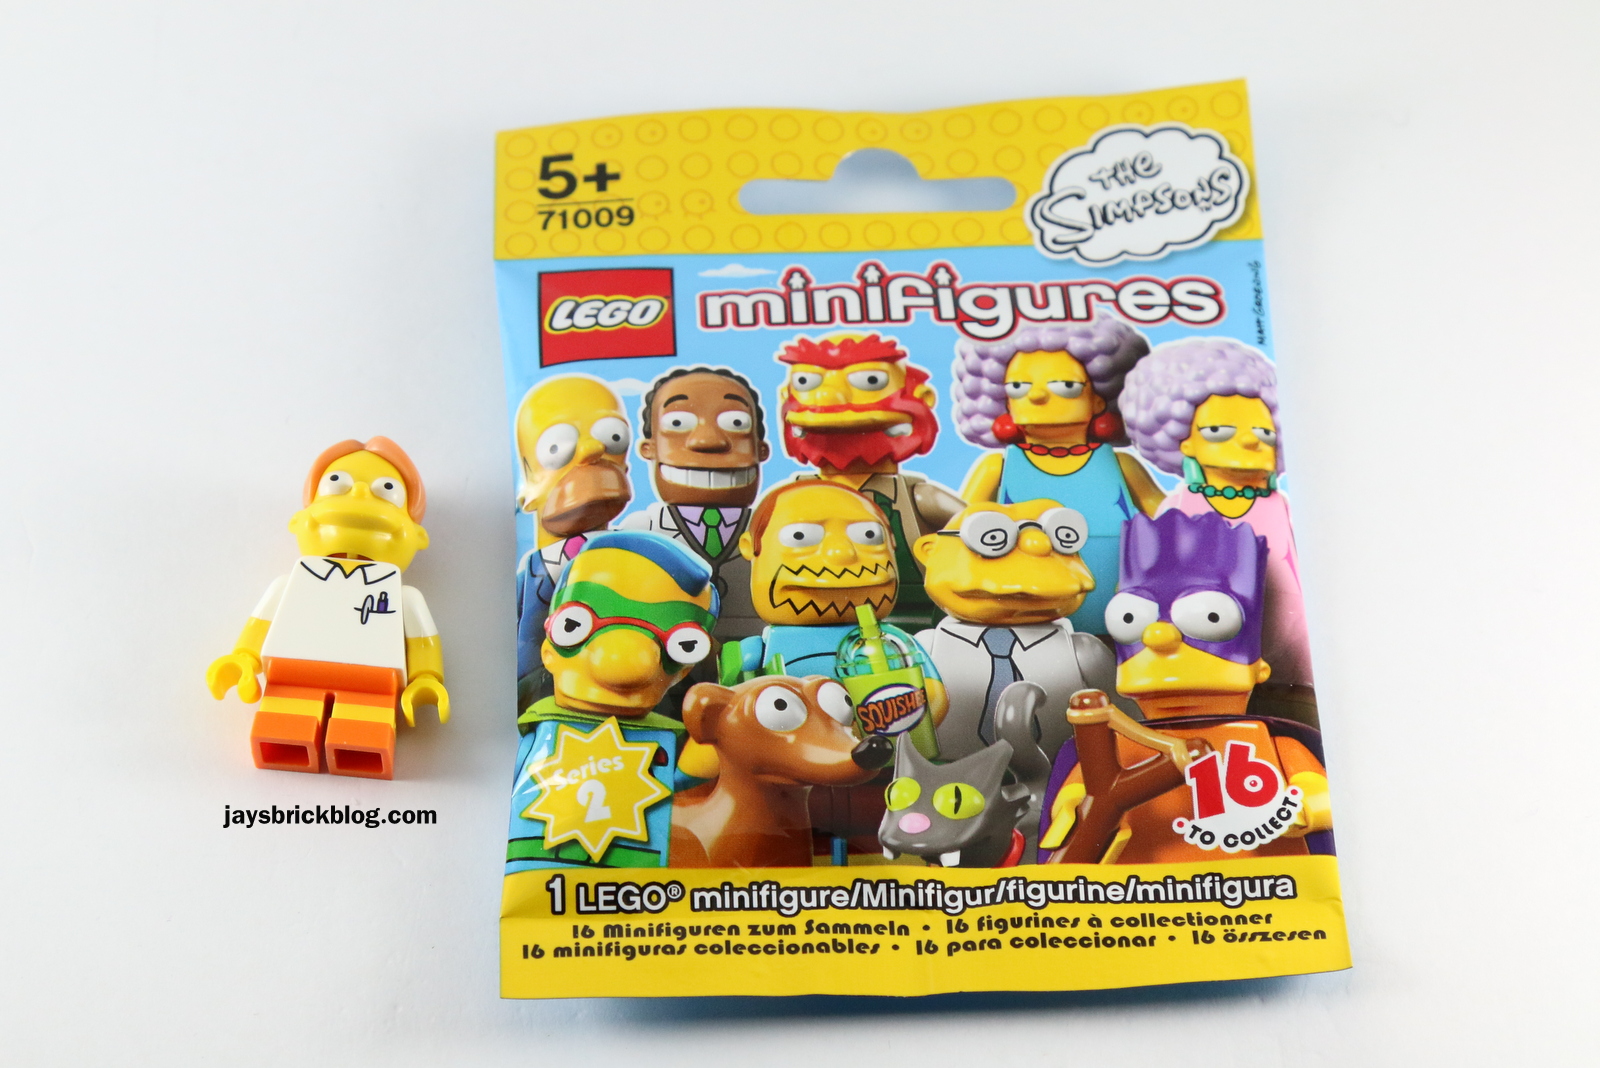 Retired Choose your figure Lego Minifigures 71009 Simpsons Series 2 